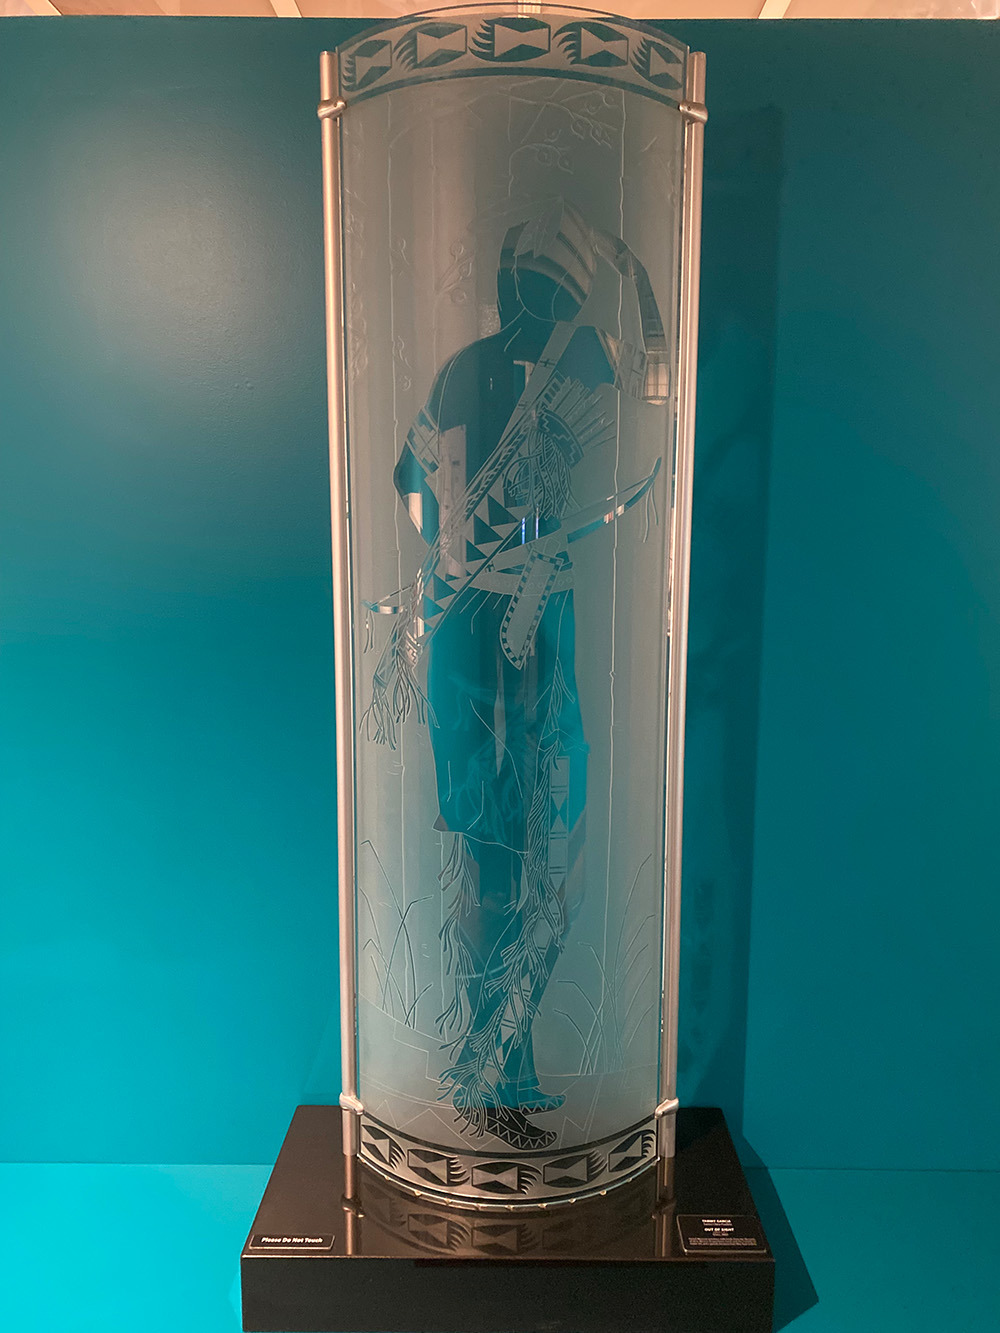 Out of Sight is a slumped and etched glass sculpture. A tall, rectangular convex glass panel is anchored to a black base by two vertical steel rods that extend from the top to the bottom sides of the panel.